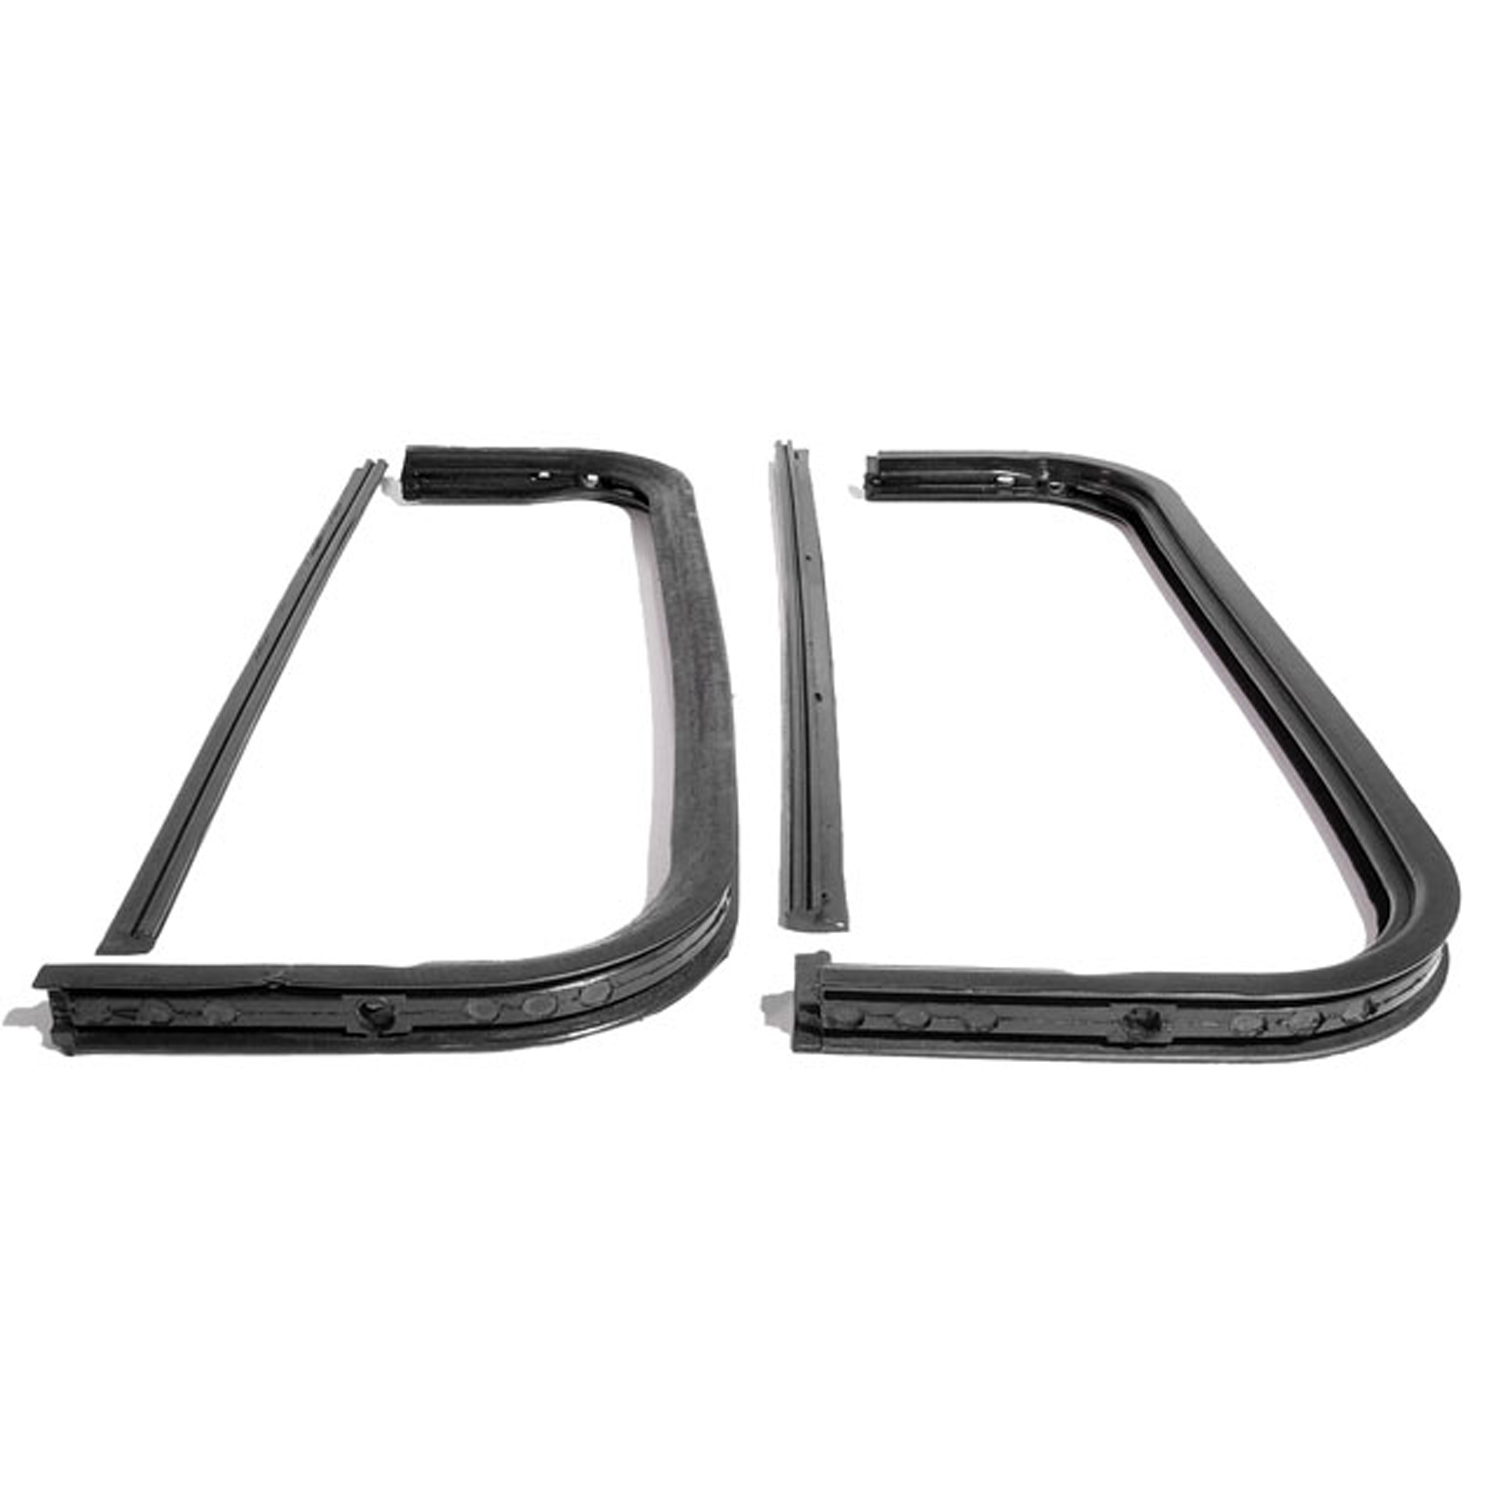 1961 Chevrolet K10 Pickup Vent Window Seals with Division Post Seals-WR 1900